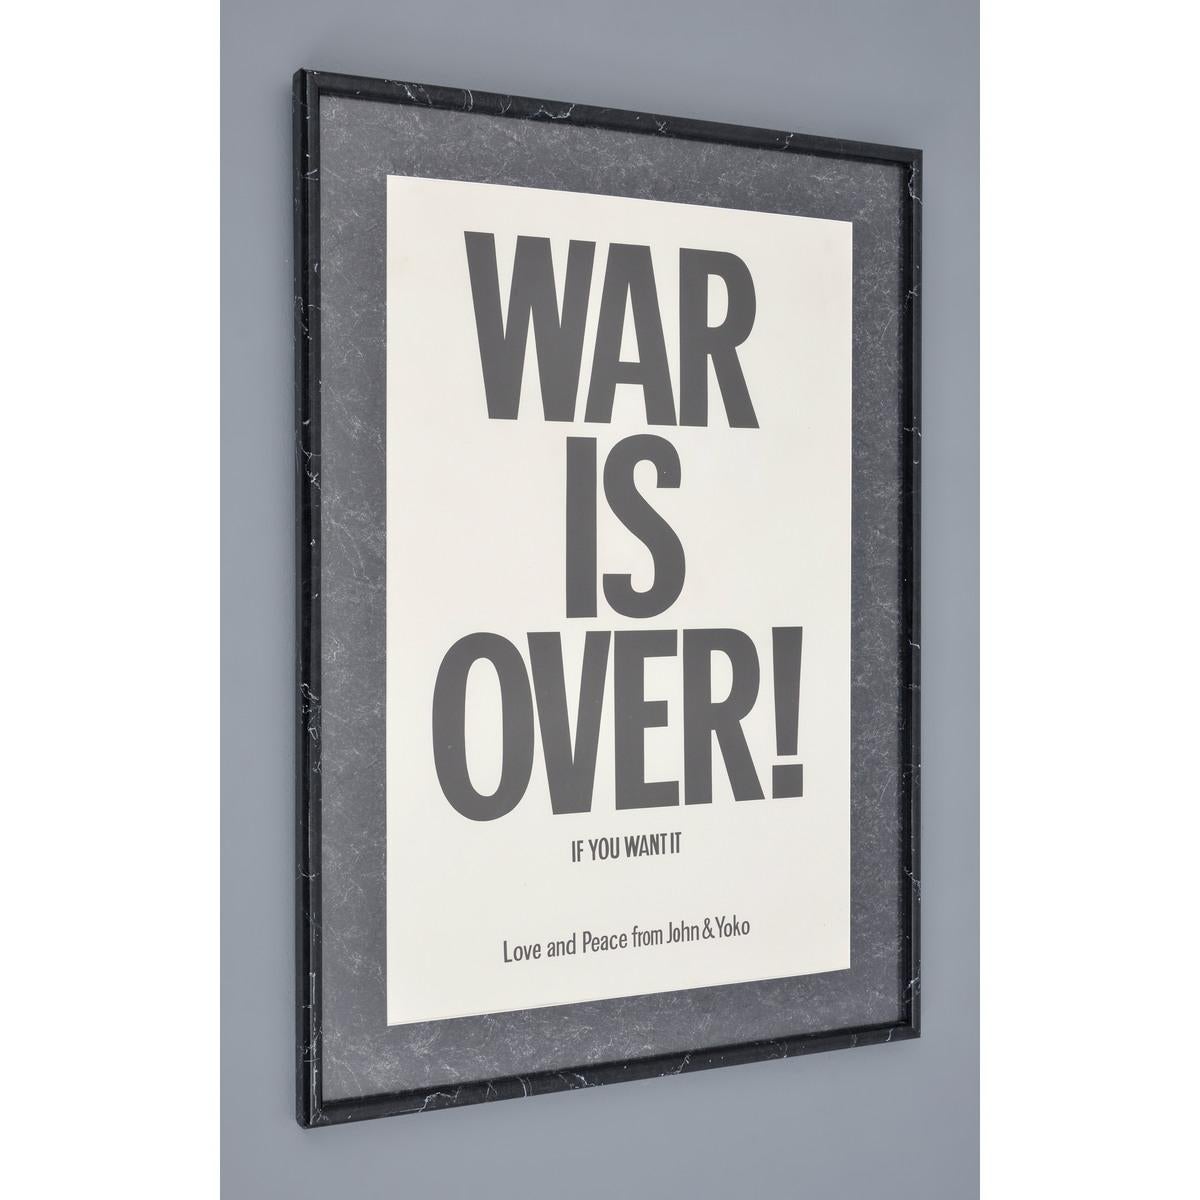 John Lennon & Yoko Ono WAR IS OVER Lithograph Poster For Sale 1